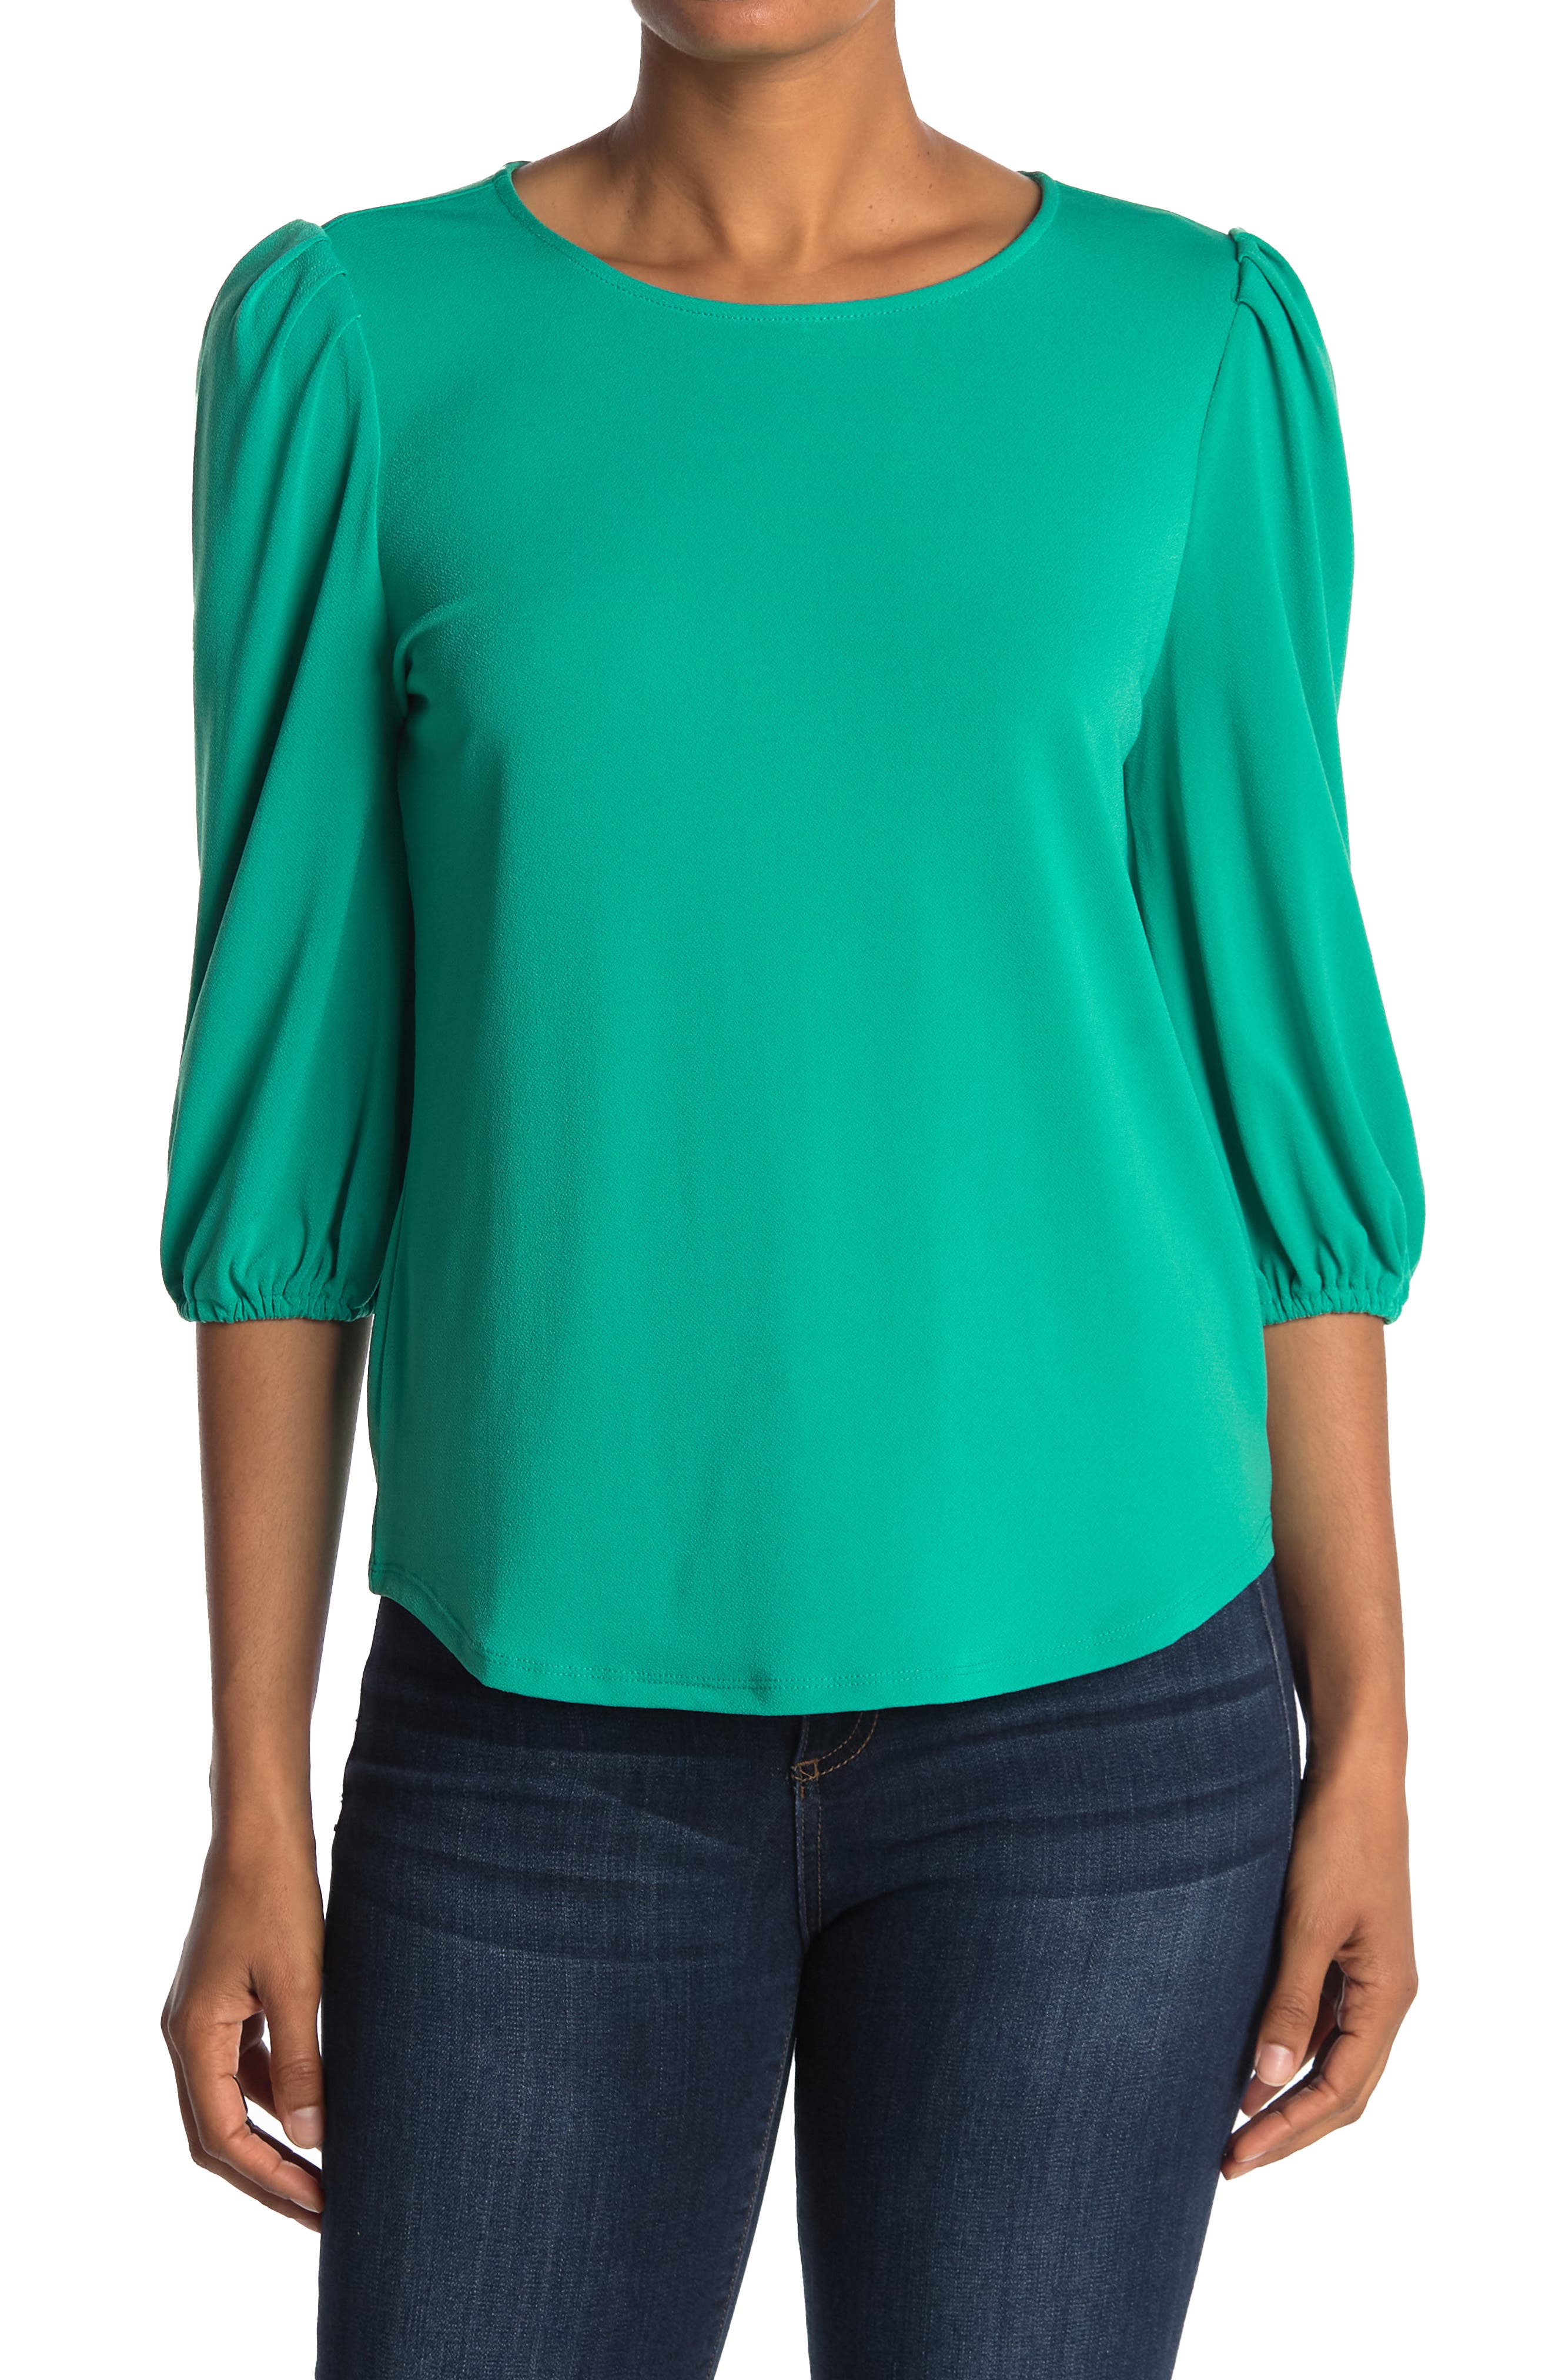 Adrianna Papell Scoop Neck 3/4 Sleeve Moss Crepe Top In Harbr Teal